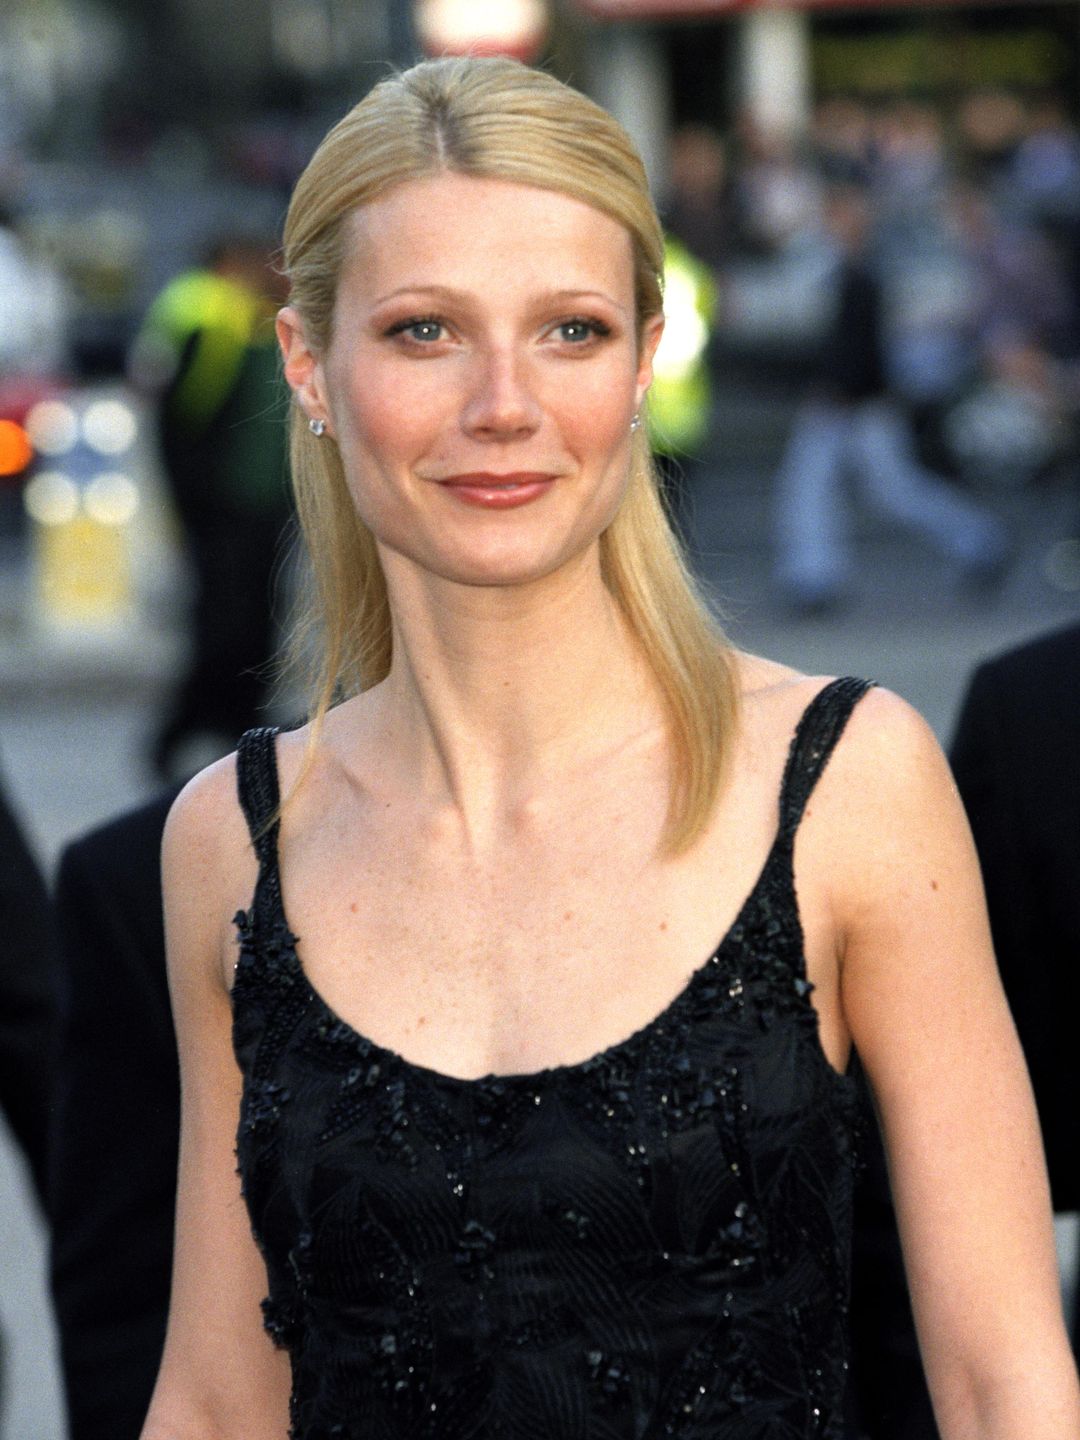 Gwyneth Paltrow Attends The 51St Bafta British Academy Film Awards  in a black embellished corset top